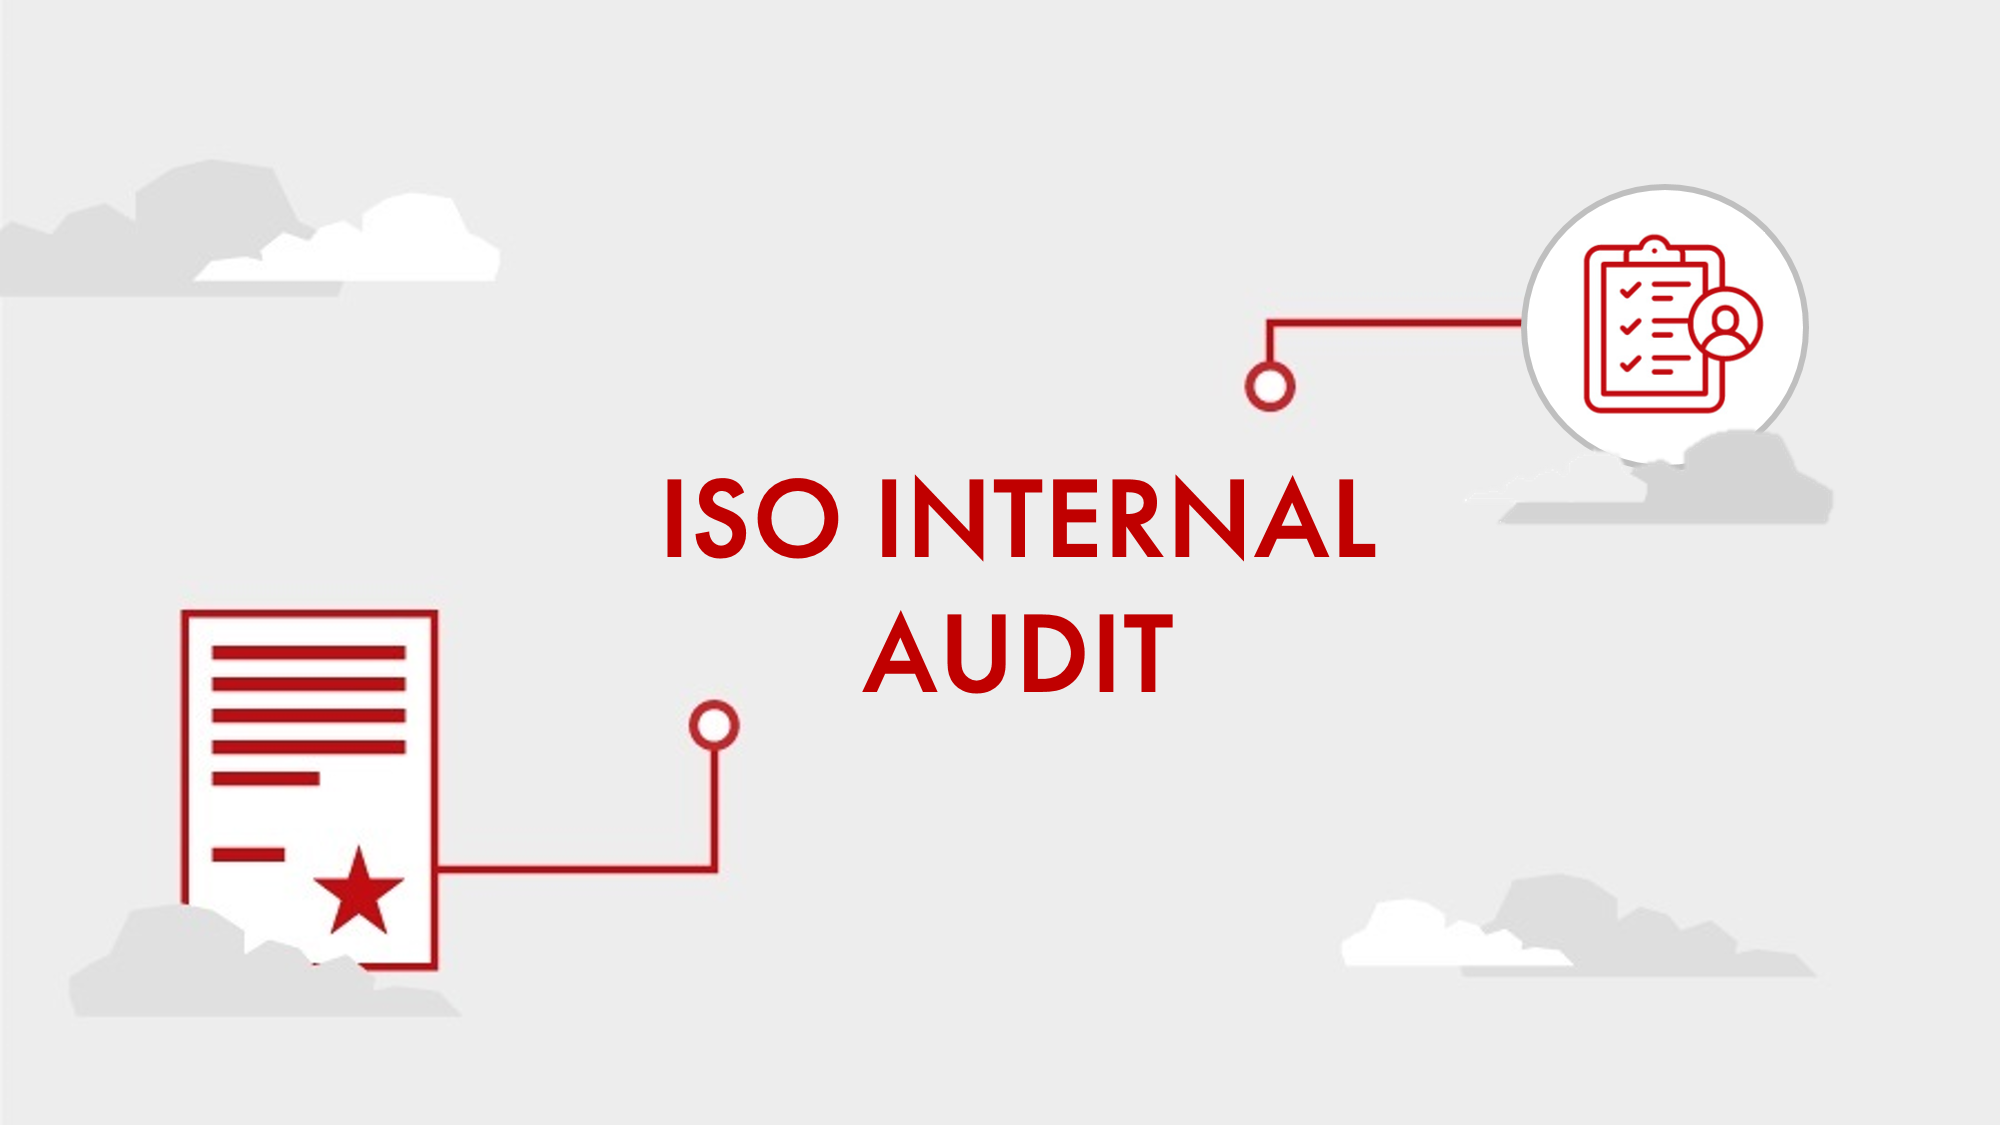 ISO INTERNAL AUDIT: ALL YOU NEED TO KNOW